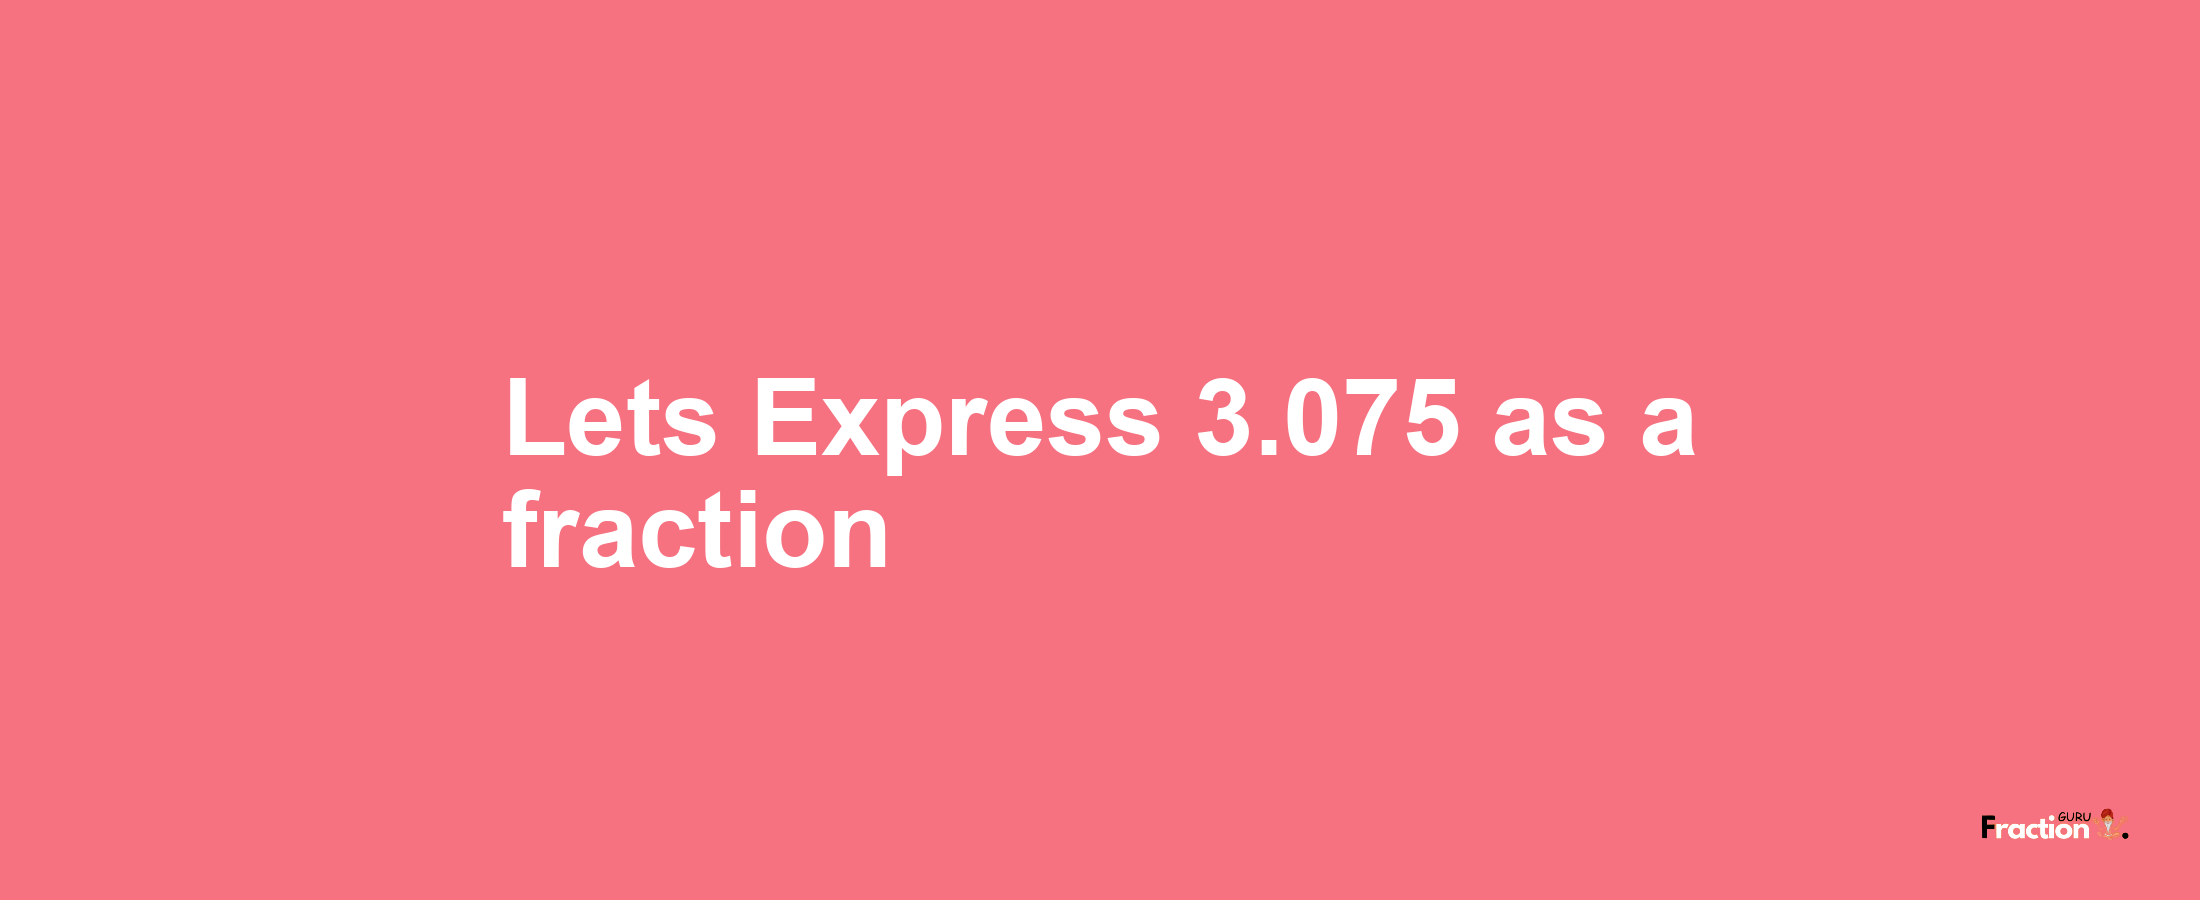 Lets Express 3.075 as afraction